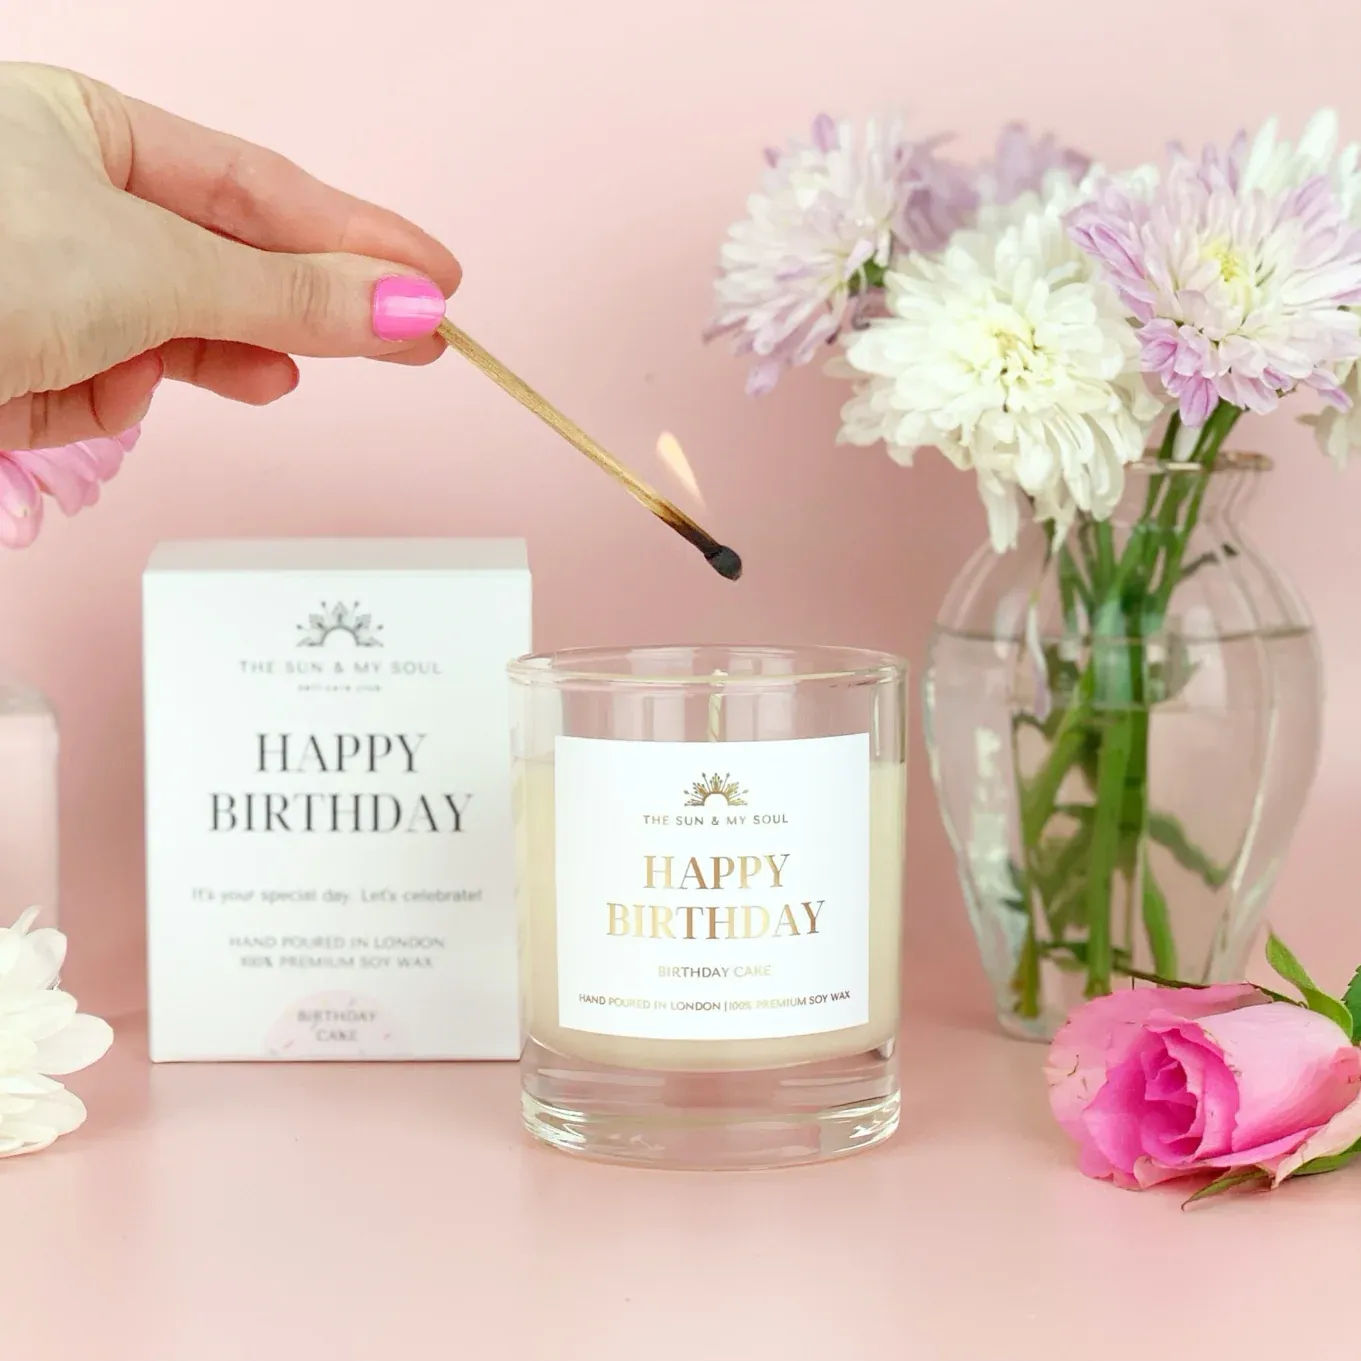 Happy Birthday - Birthday Cake Scented Premium Soy Wax Candle